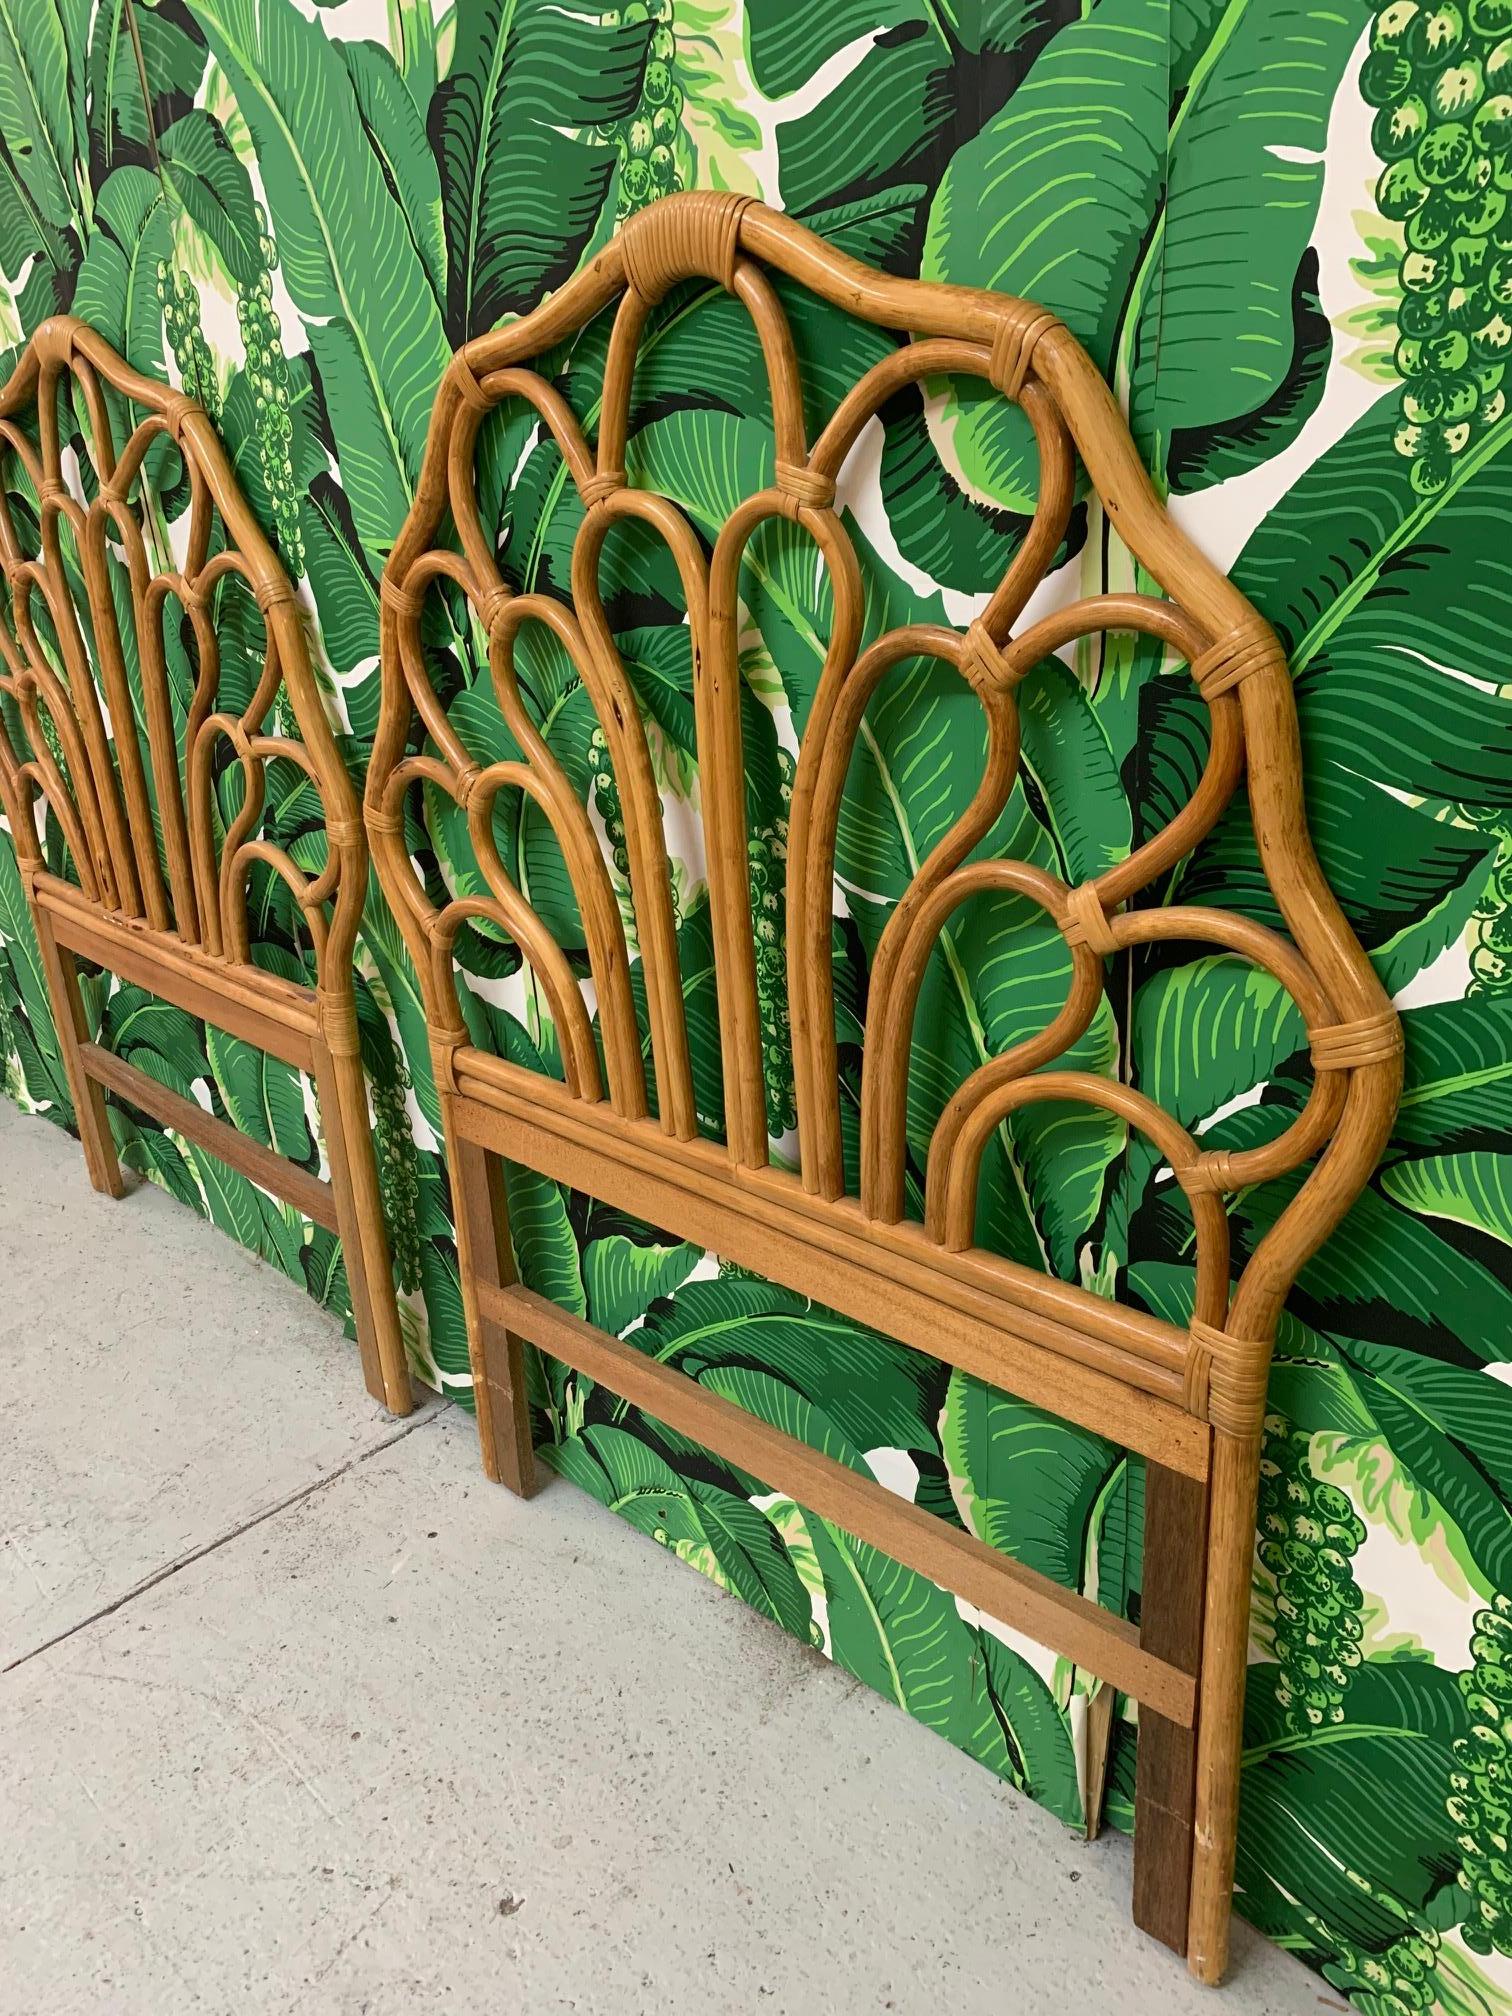 Pair of vintage rattan twin bed headboards lend the perfect touch to your tropical decor. Pair with some Paul Frankl seating or Gabriella Crespi case piece. Very good condition with only very minor imperfections consistent with age.